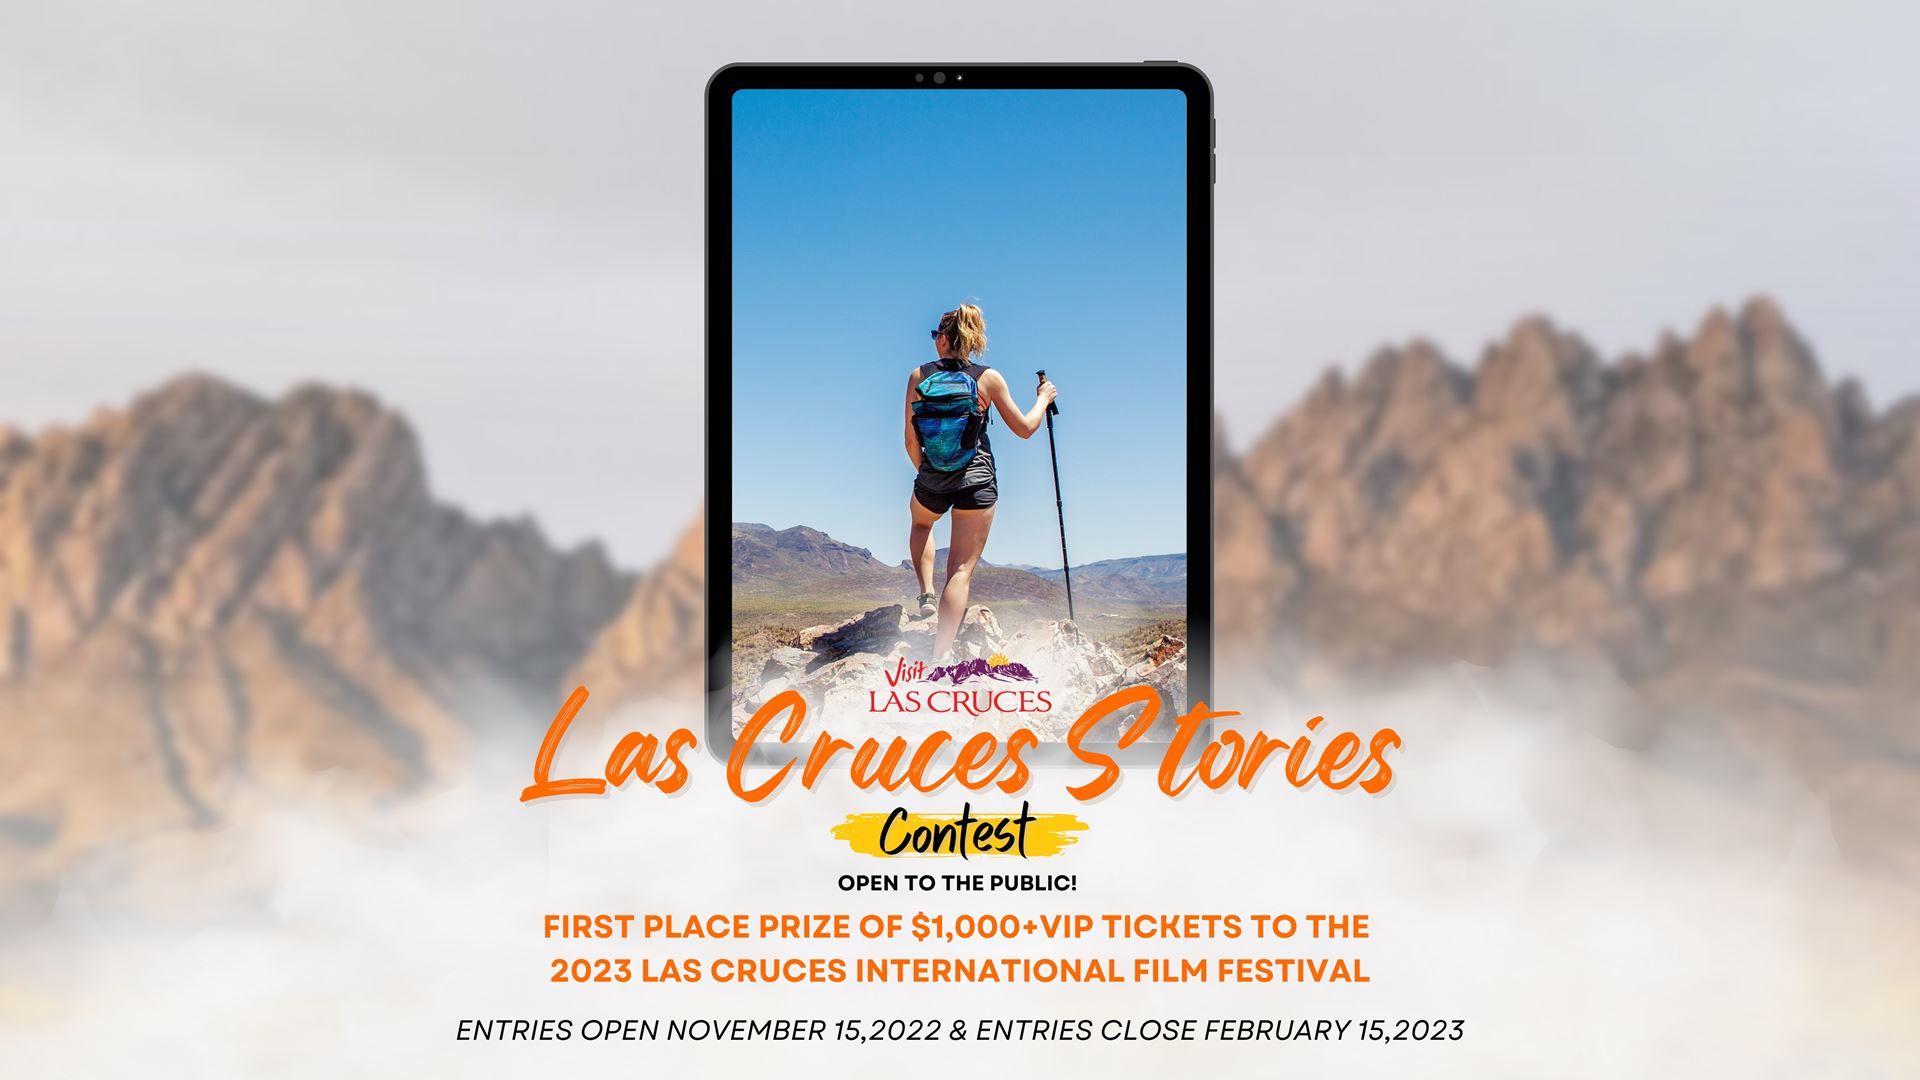 Video competition to showcase Las Cruces, submissions accepted starting Nov. 15